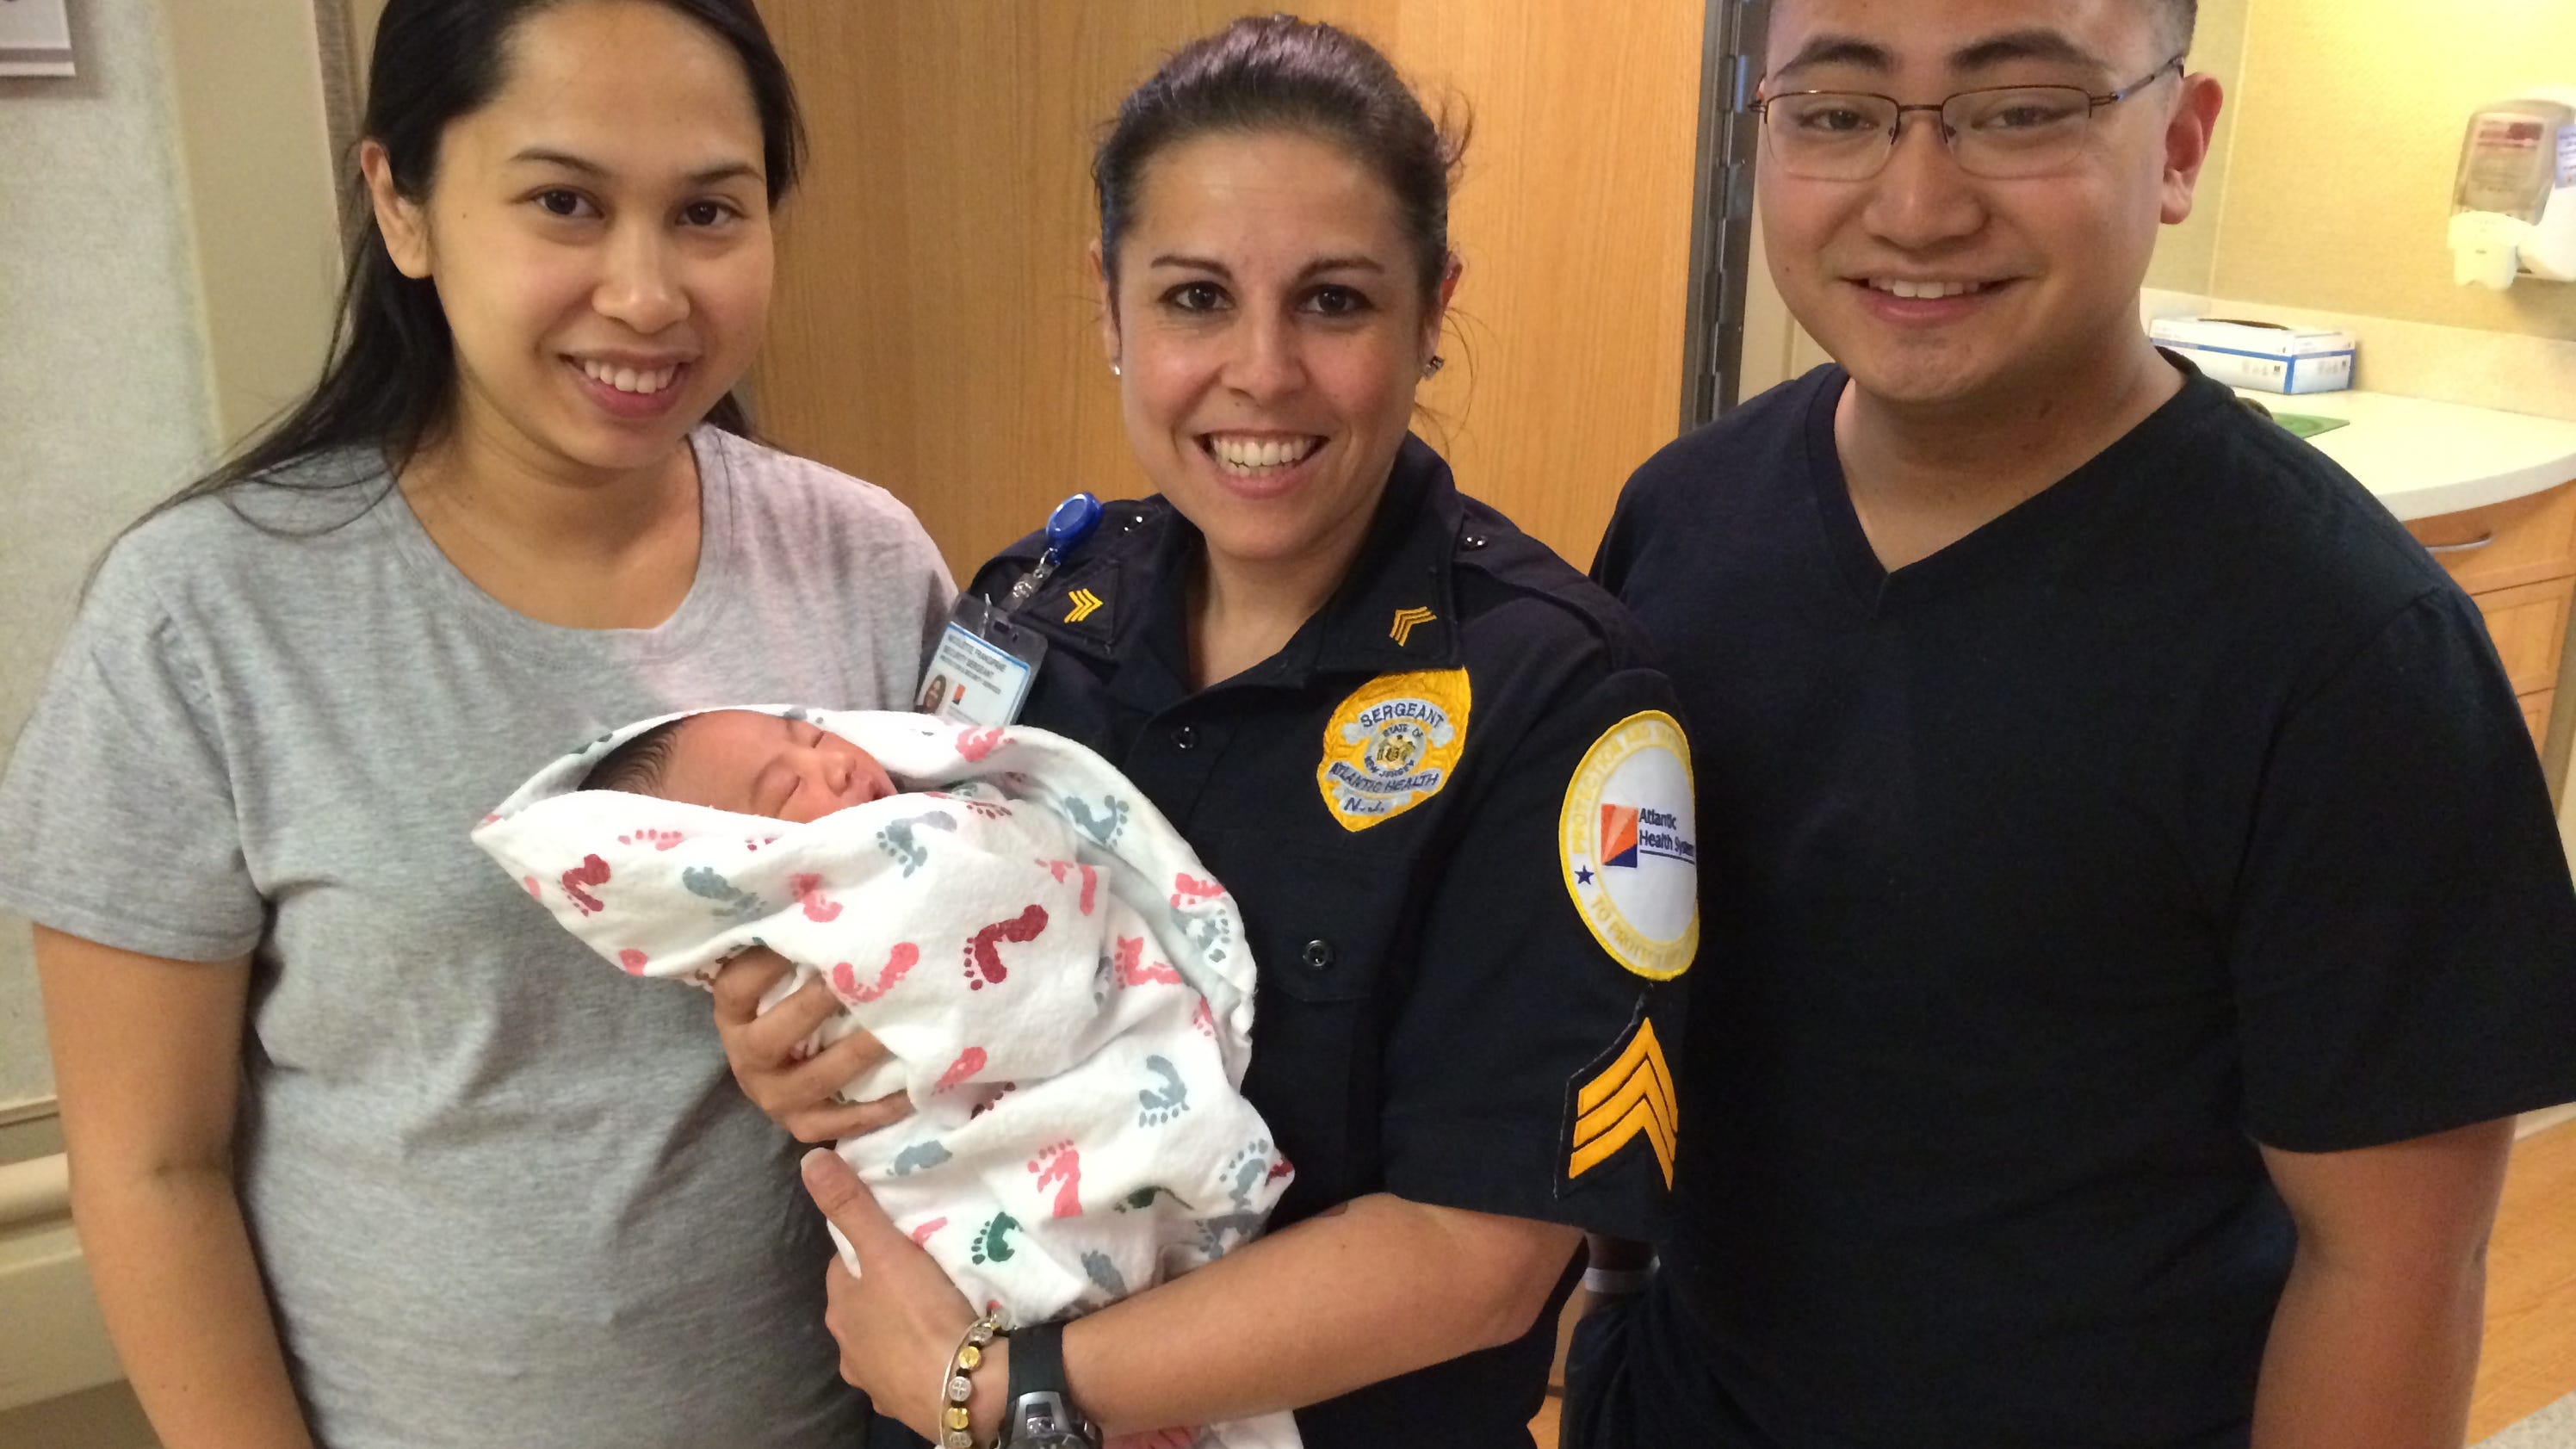 Morristown hospital security officer delivers baby